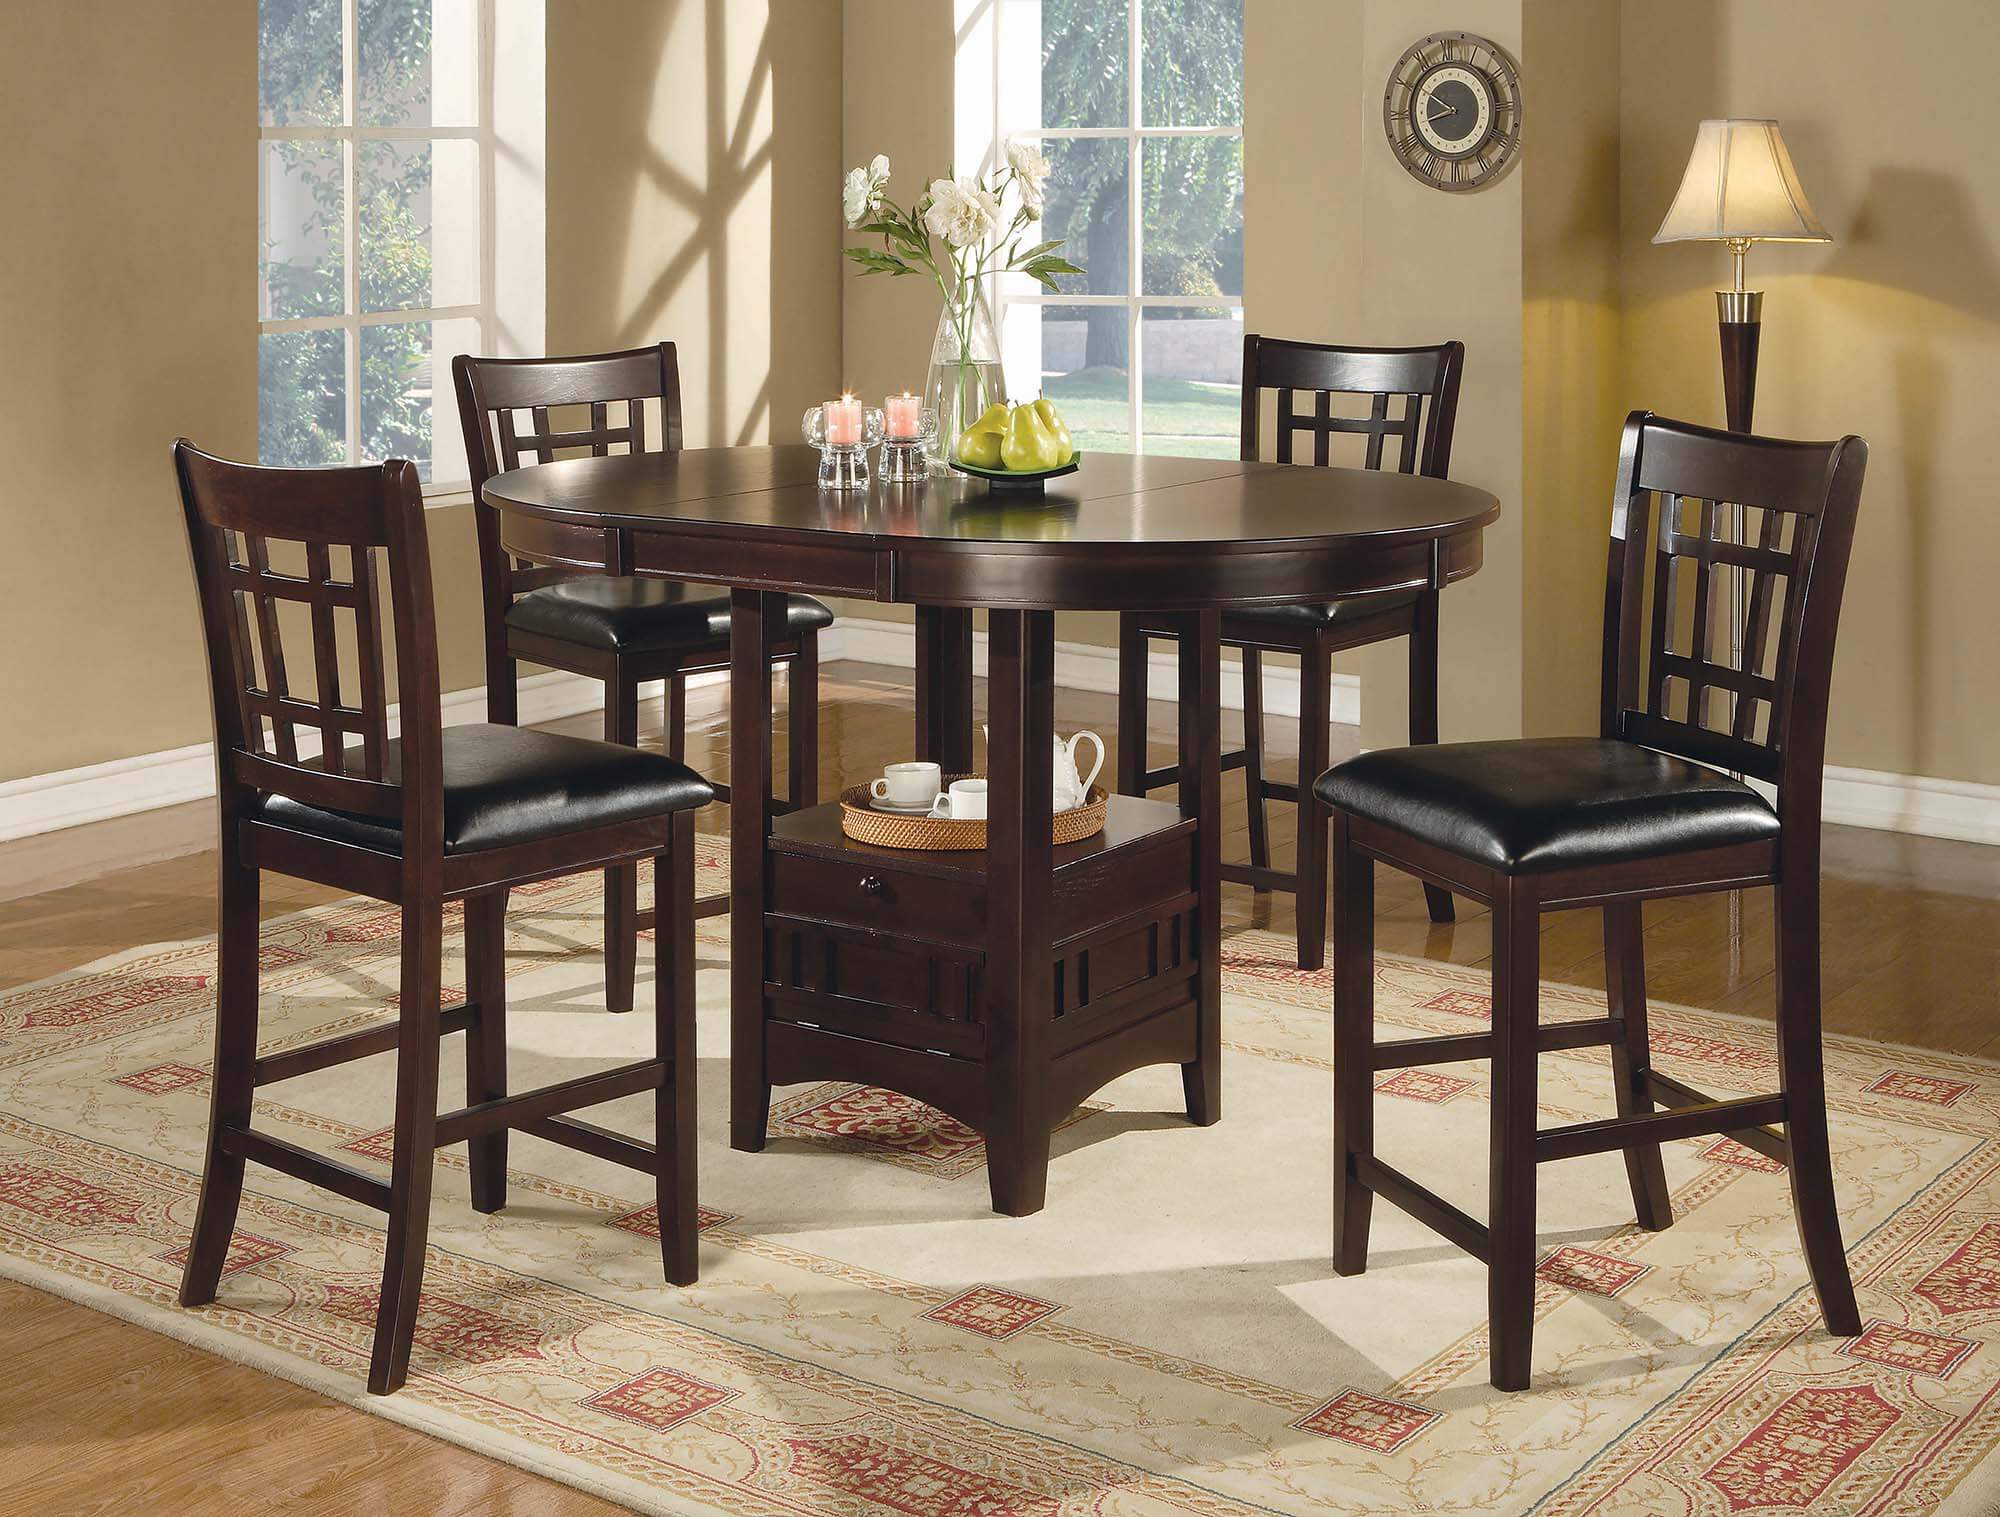 Lavon Cappuccino 5 Piece Dining Set by Coaster Furniture